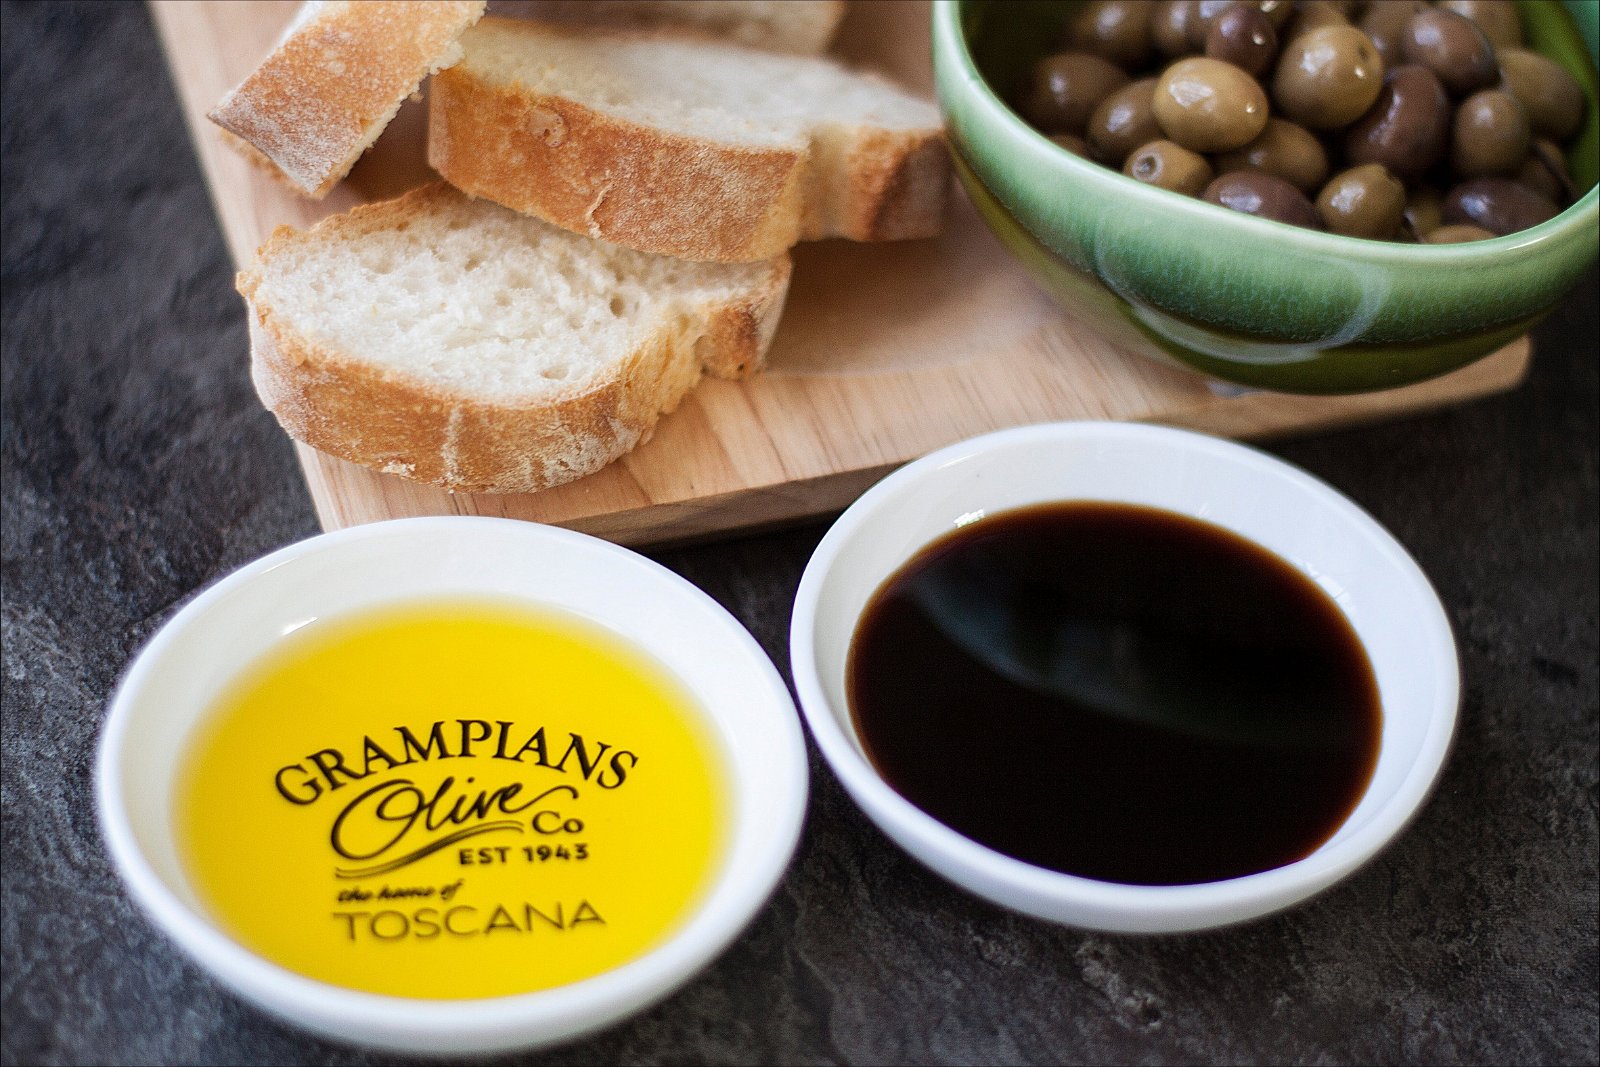 Grampians Olive Co. - Northern Rivers Accommodation